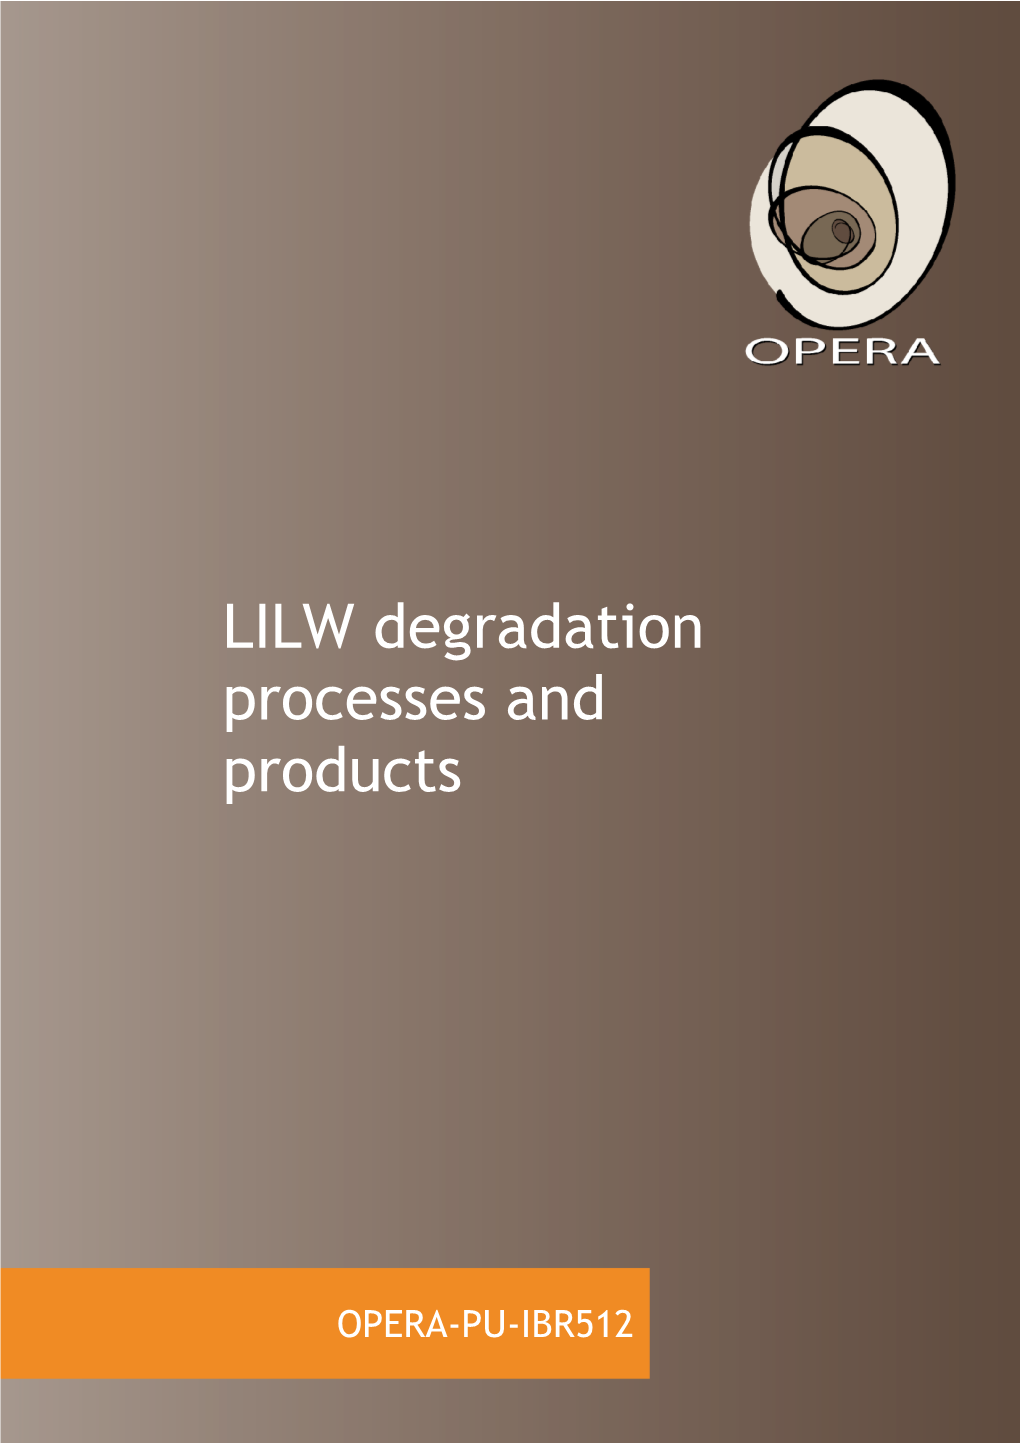 LILW Degradation Processes and Products